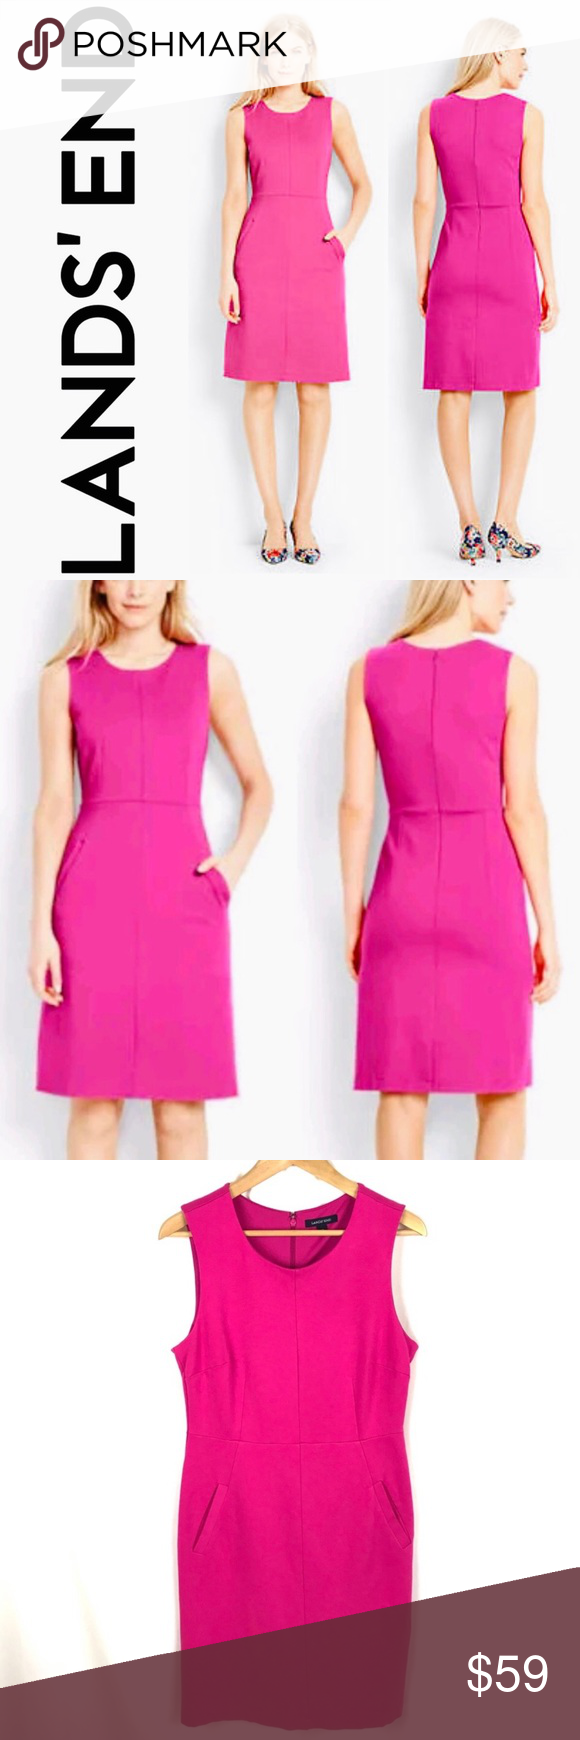 NWT Lands’ End Magenta Pink Ponte Sheath Dress New With Tags Lands’ End scoo…